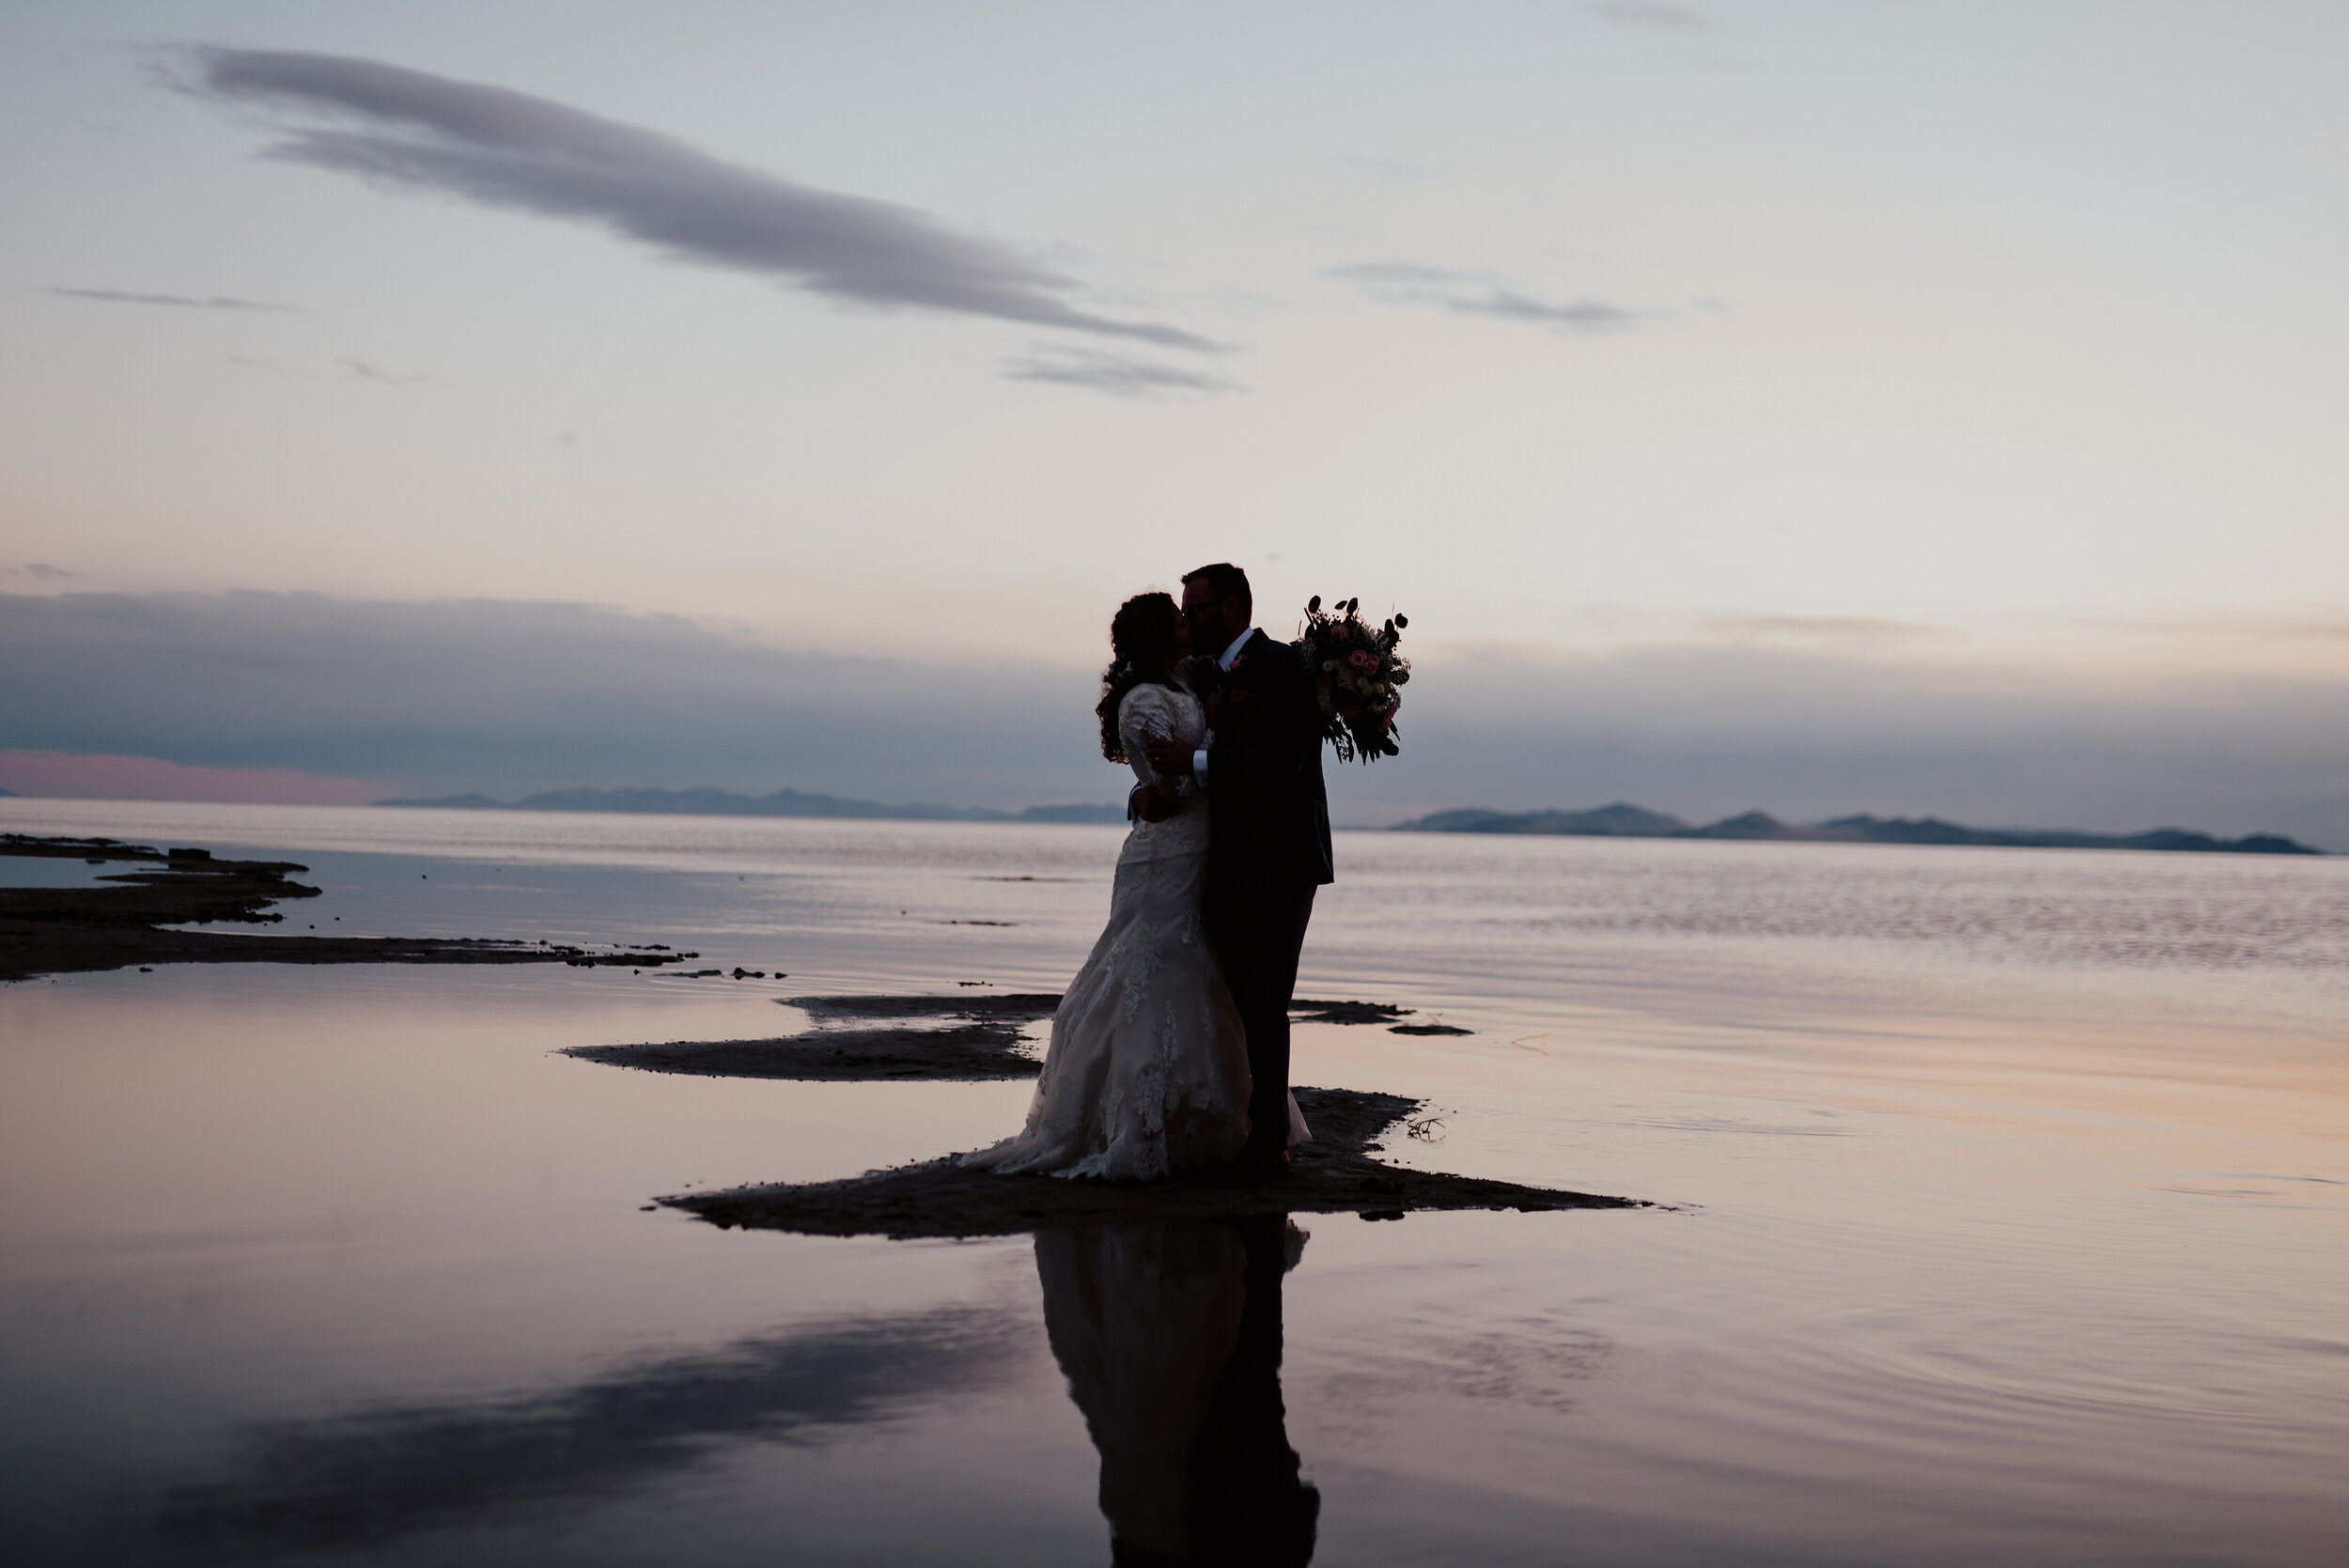 The sun had almost completely set on this bride and groom during their wedding formal session when one last kiss was needed to seal the deal at the Spiral Jetty in northern Utah. Wedding formal photoshoot in Spiral Jetty Northern Utah Great Salt Lake photography wedding formals natural photo aesthetic bride and groom #spiraljetty #utahphotography #weddingformals #gettingmarried #weddingattire #utahwedding #greatoutdoorswedding #weddingformalsphotoshoot #naturalbeauty